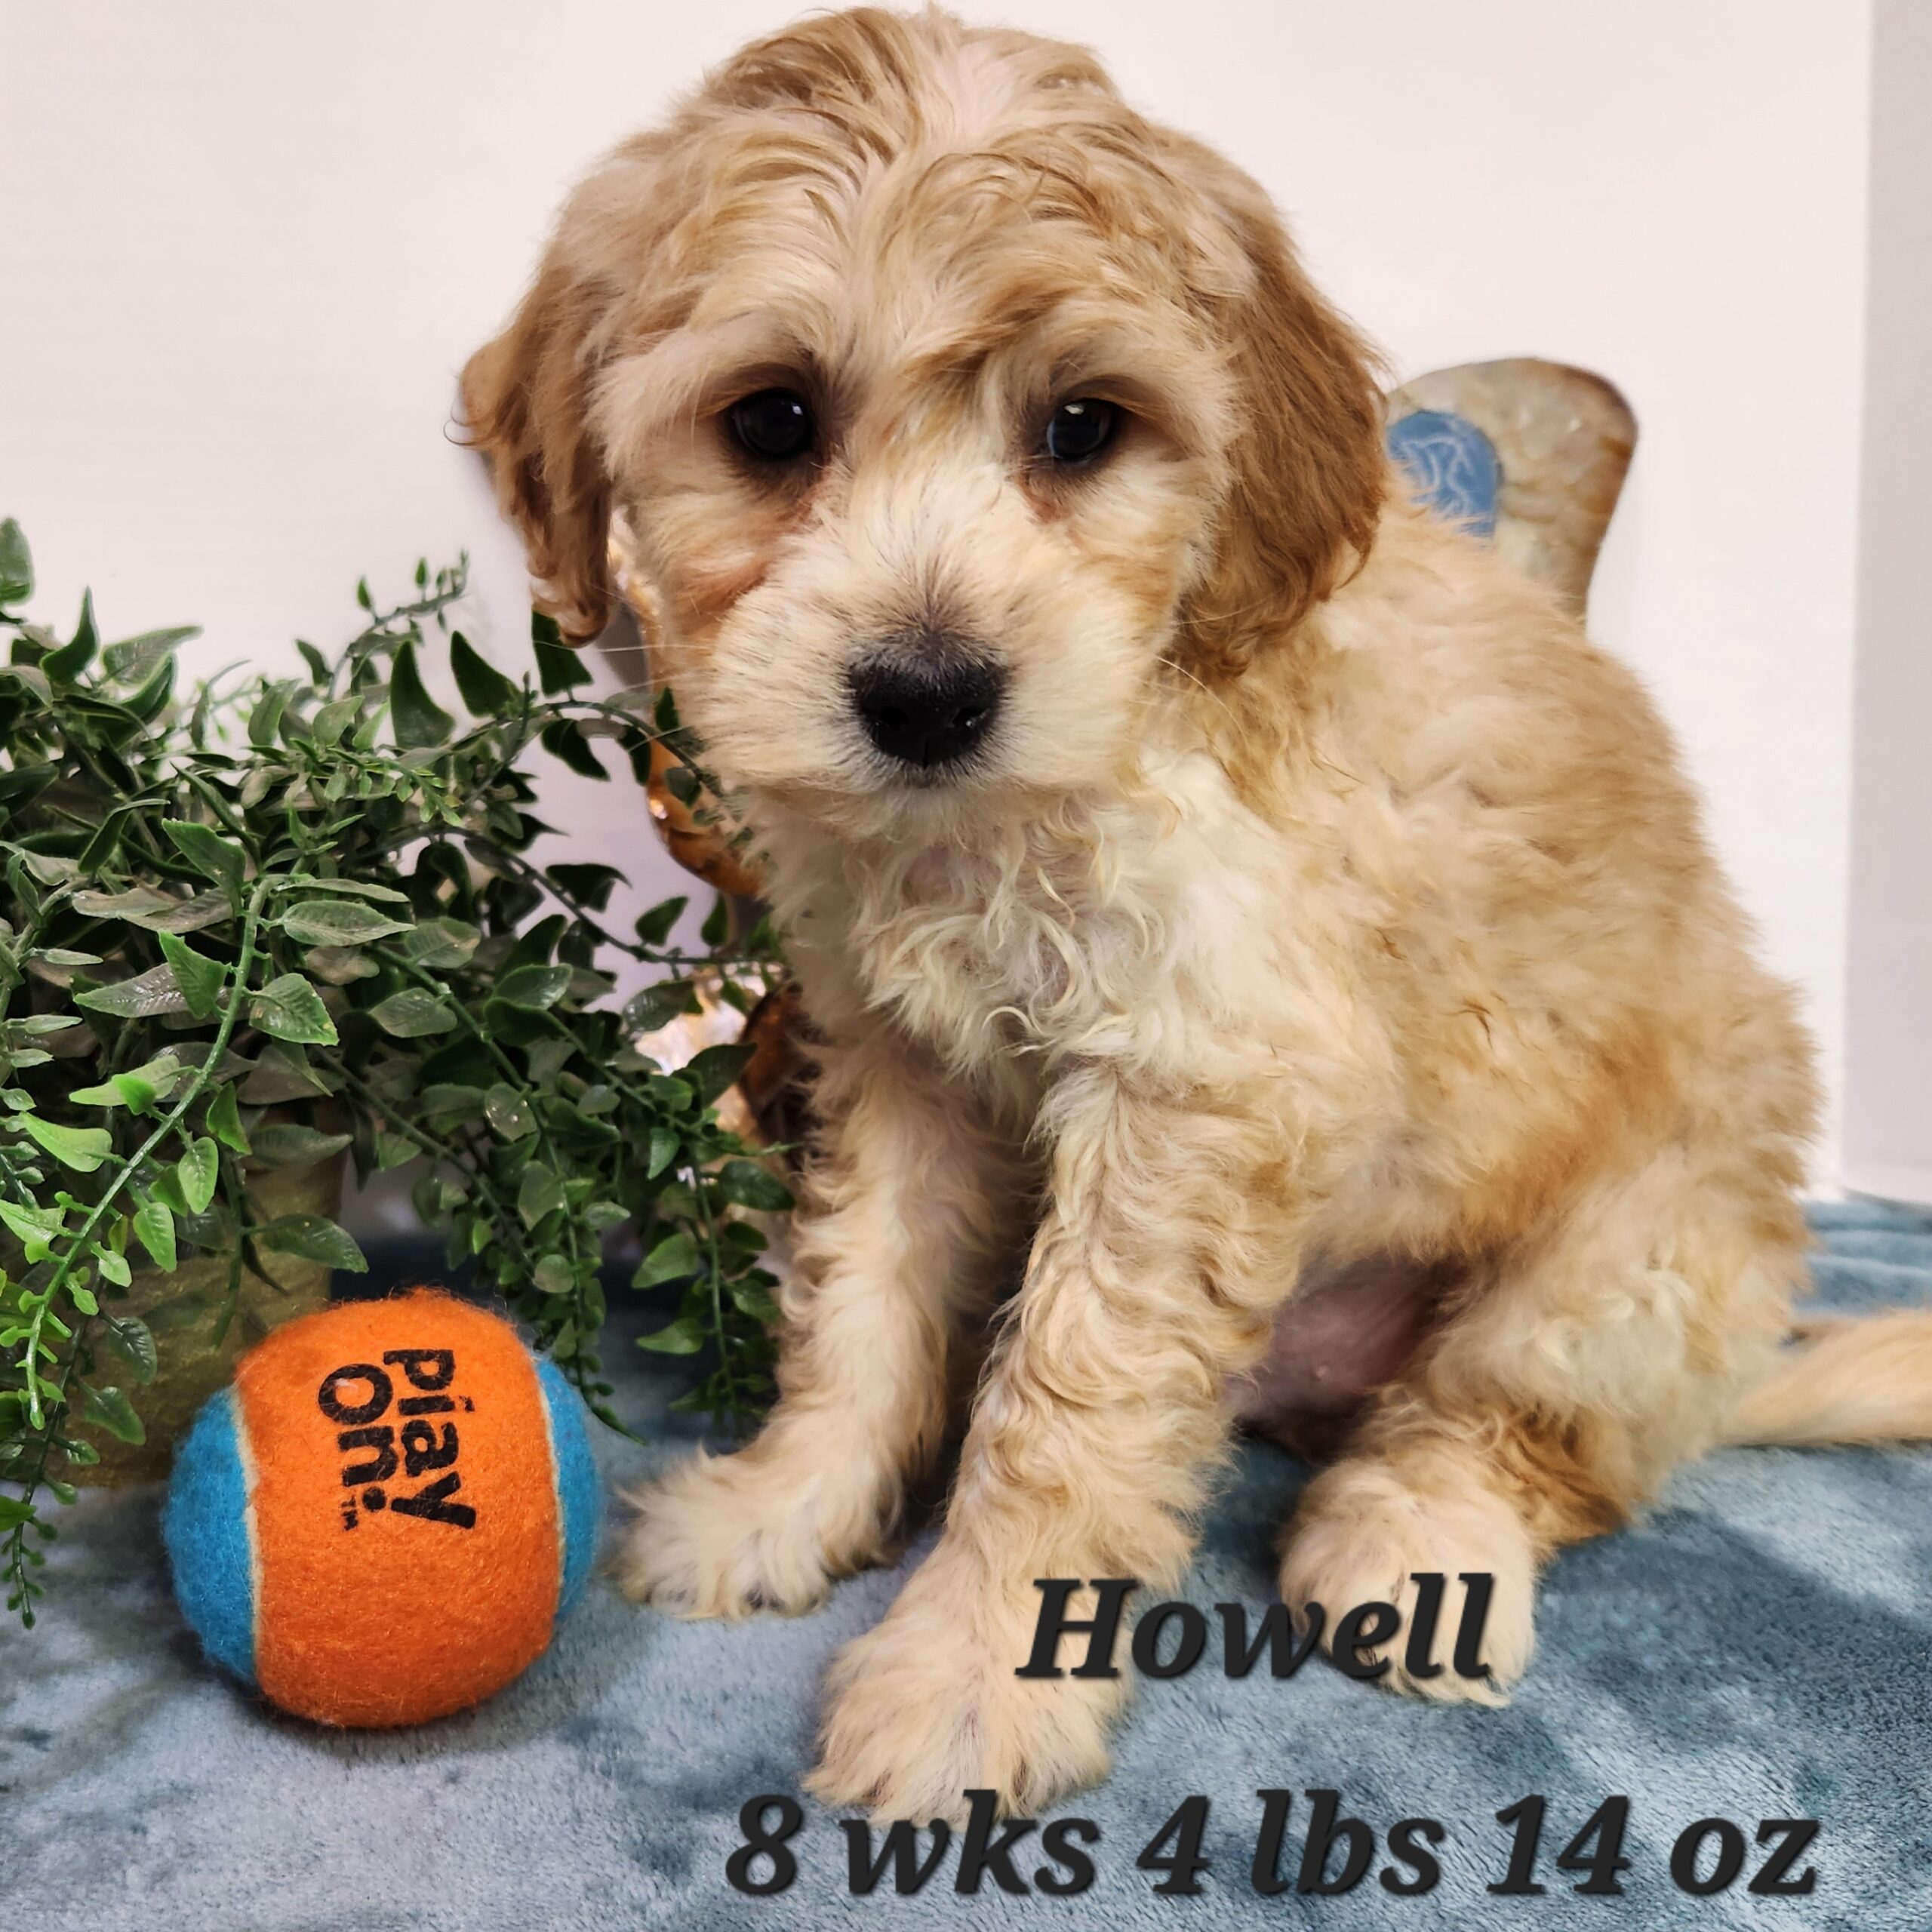 Cream colored Miniature male goldendoodle. wavy hair